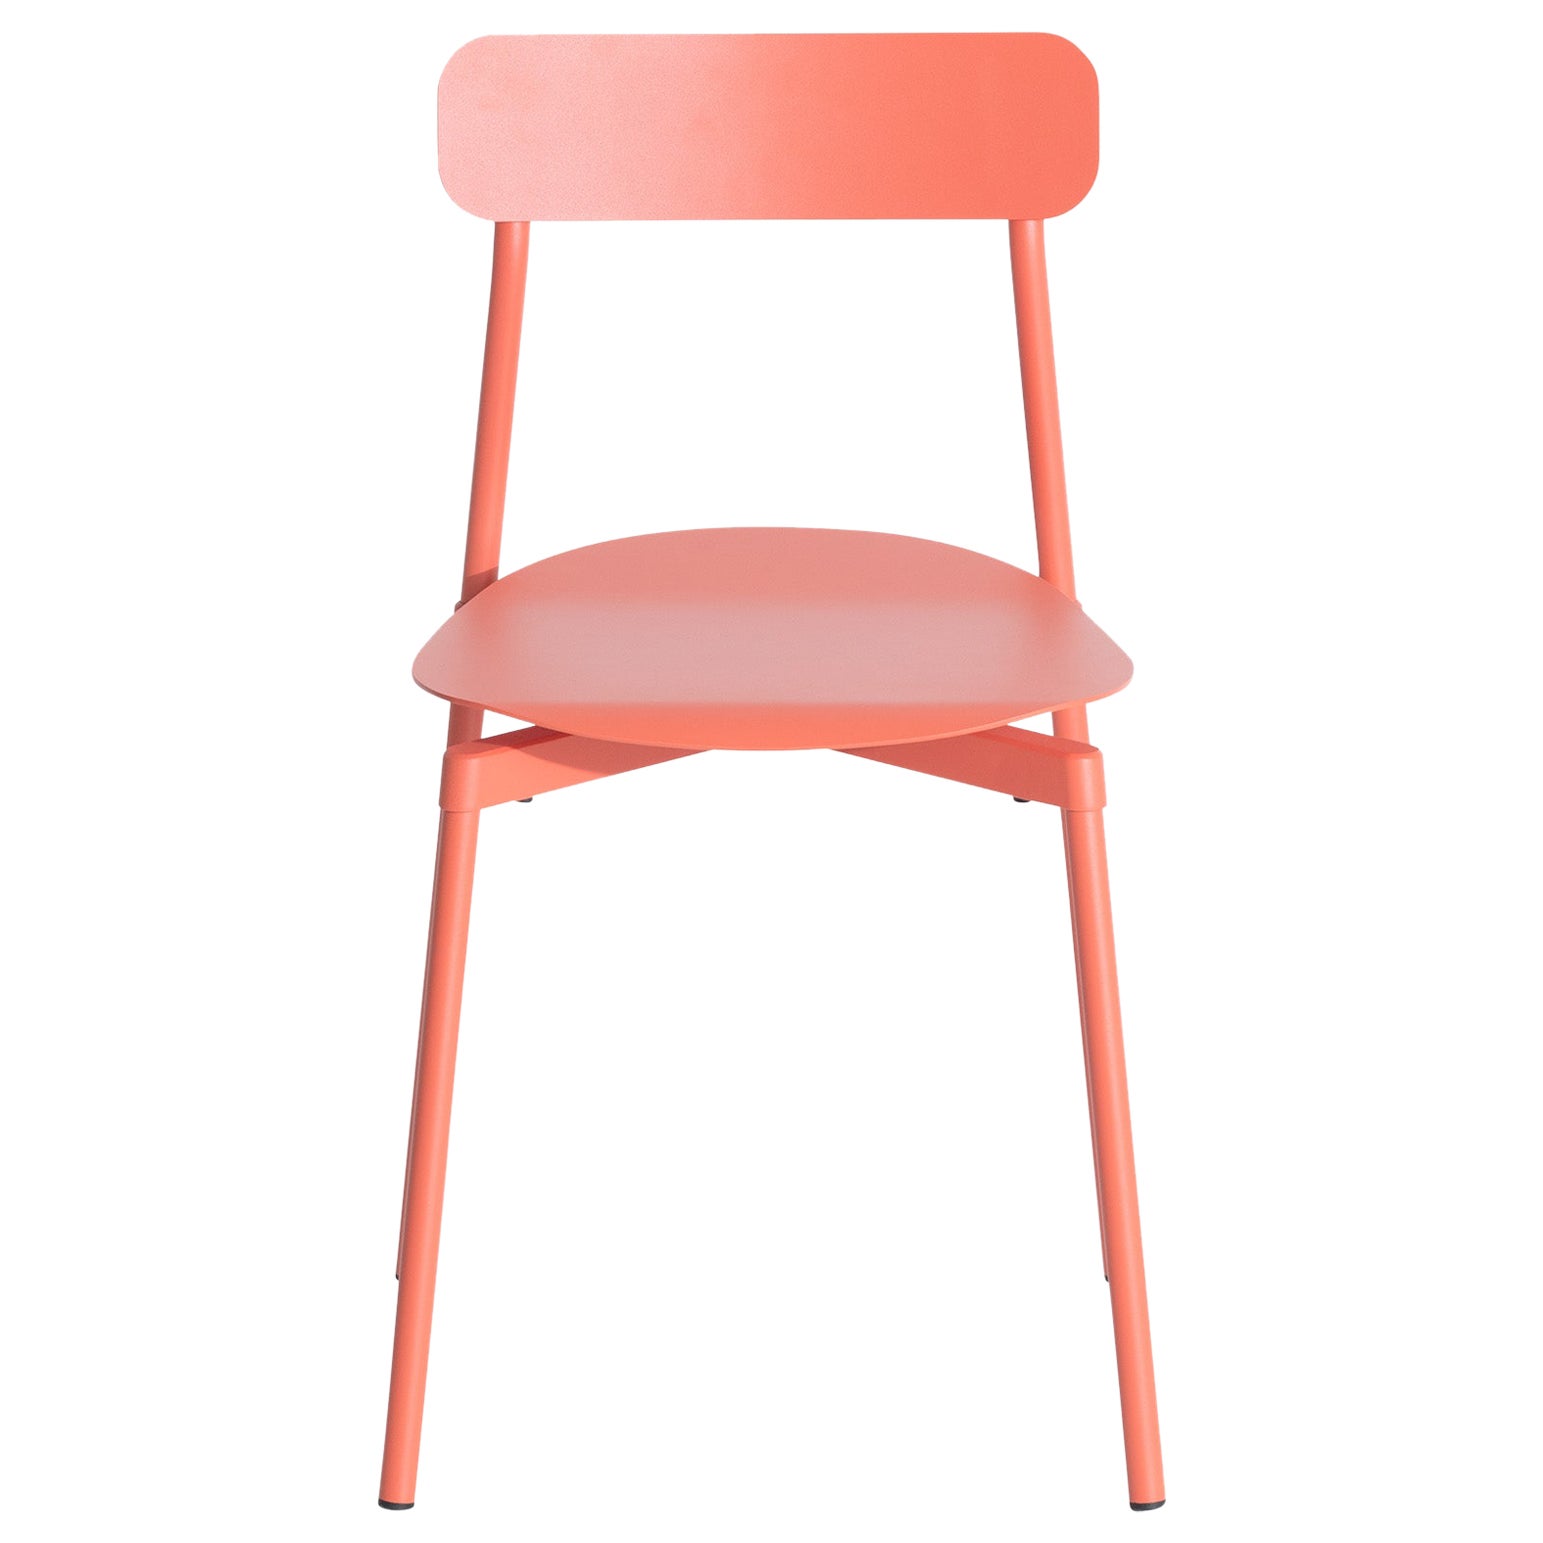 Petite Friture Fromme Chair in Coral Aluminium by Tom Chung, 2019 For Sale